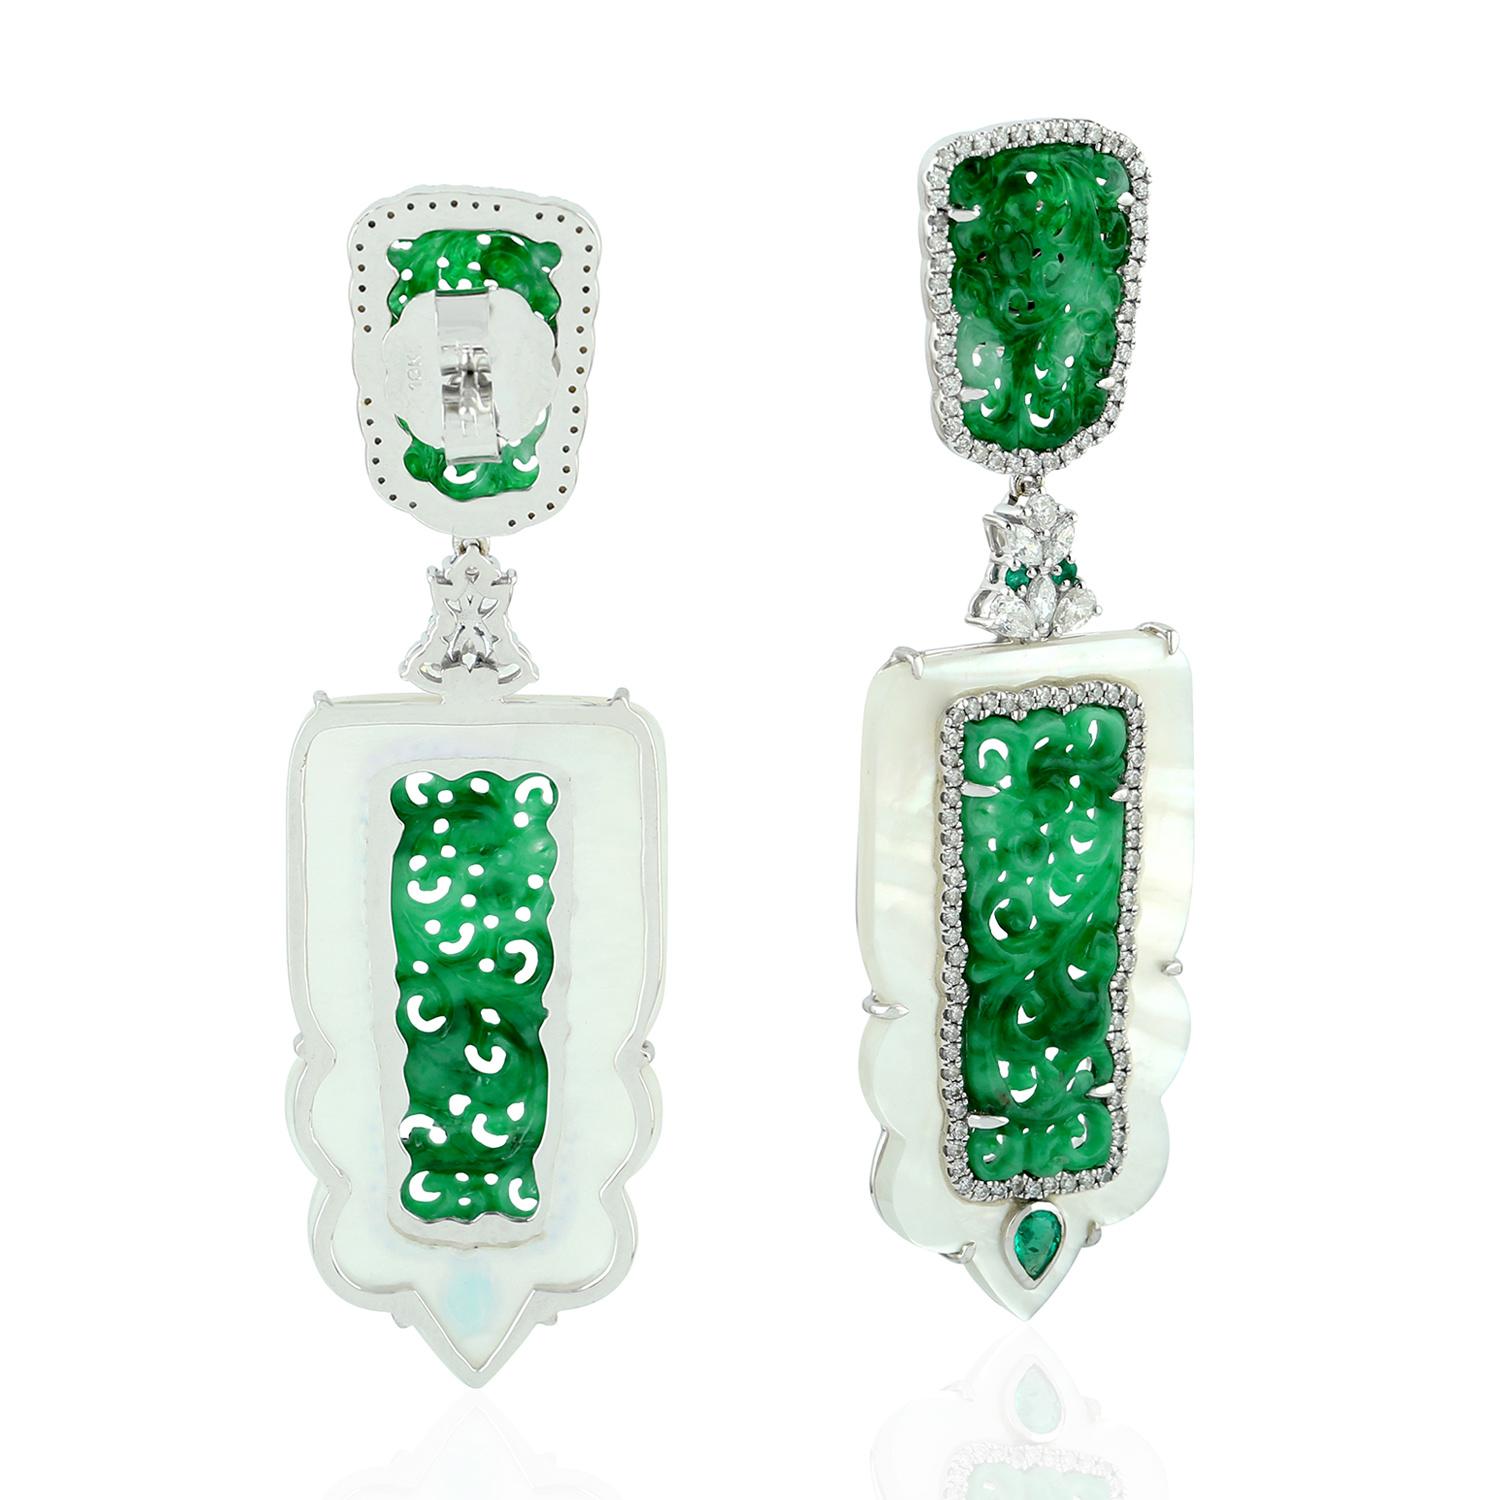 These stunning hand carved Jade earrings are crafted in 18-karat white gold. It is set in 13.32 carats Jade, .34 carats emerald, mother of pearl and 1.49 carats of sparkling diamonds.

FOLLOW  MEGHNA JEWELS storefront to view the latest collection &